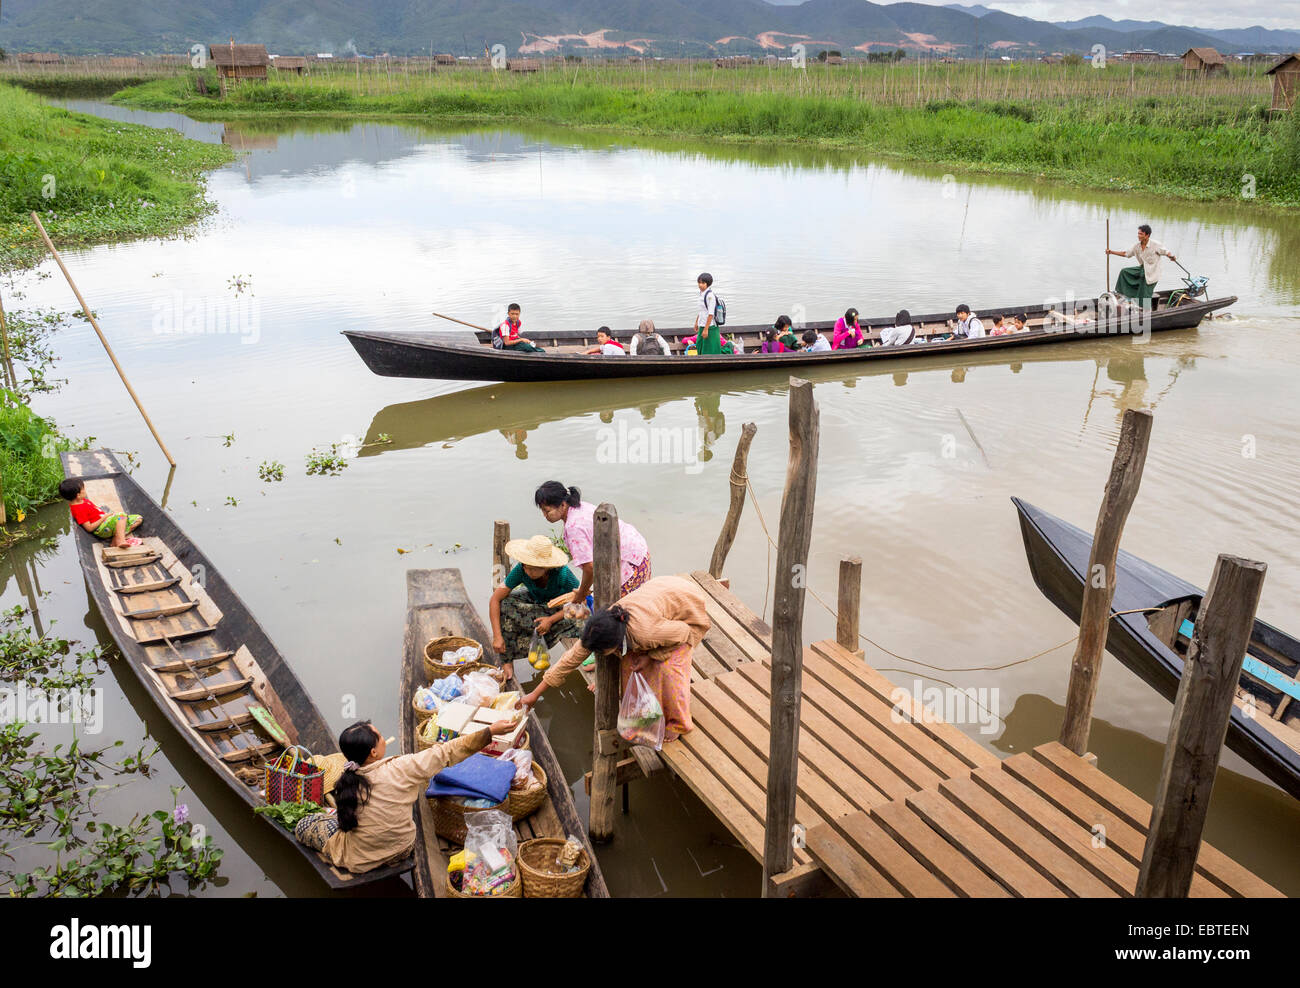 women selling and buying from a floating shop on lake Inle in Burma, Myanmar and children in uniform traveling back from school Stock Photo